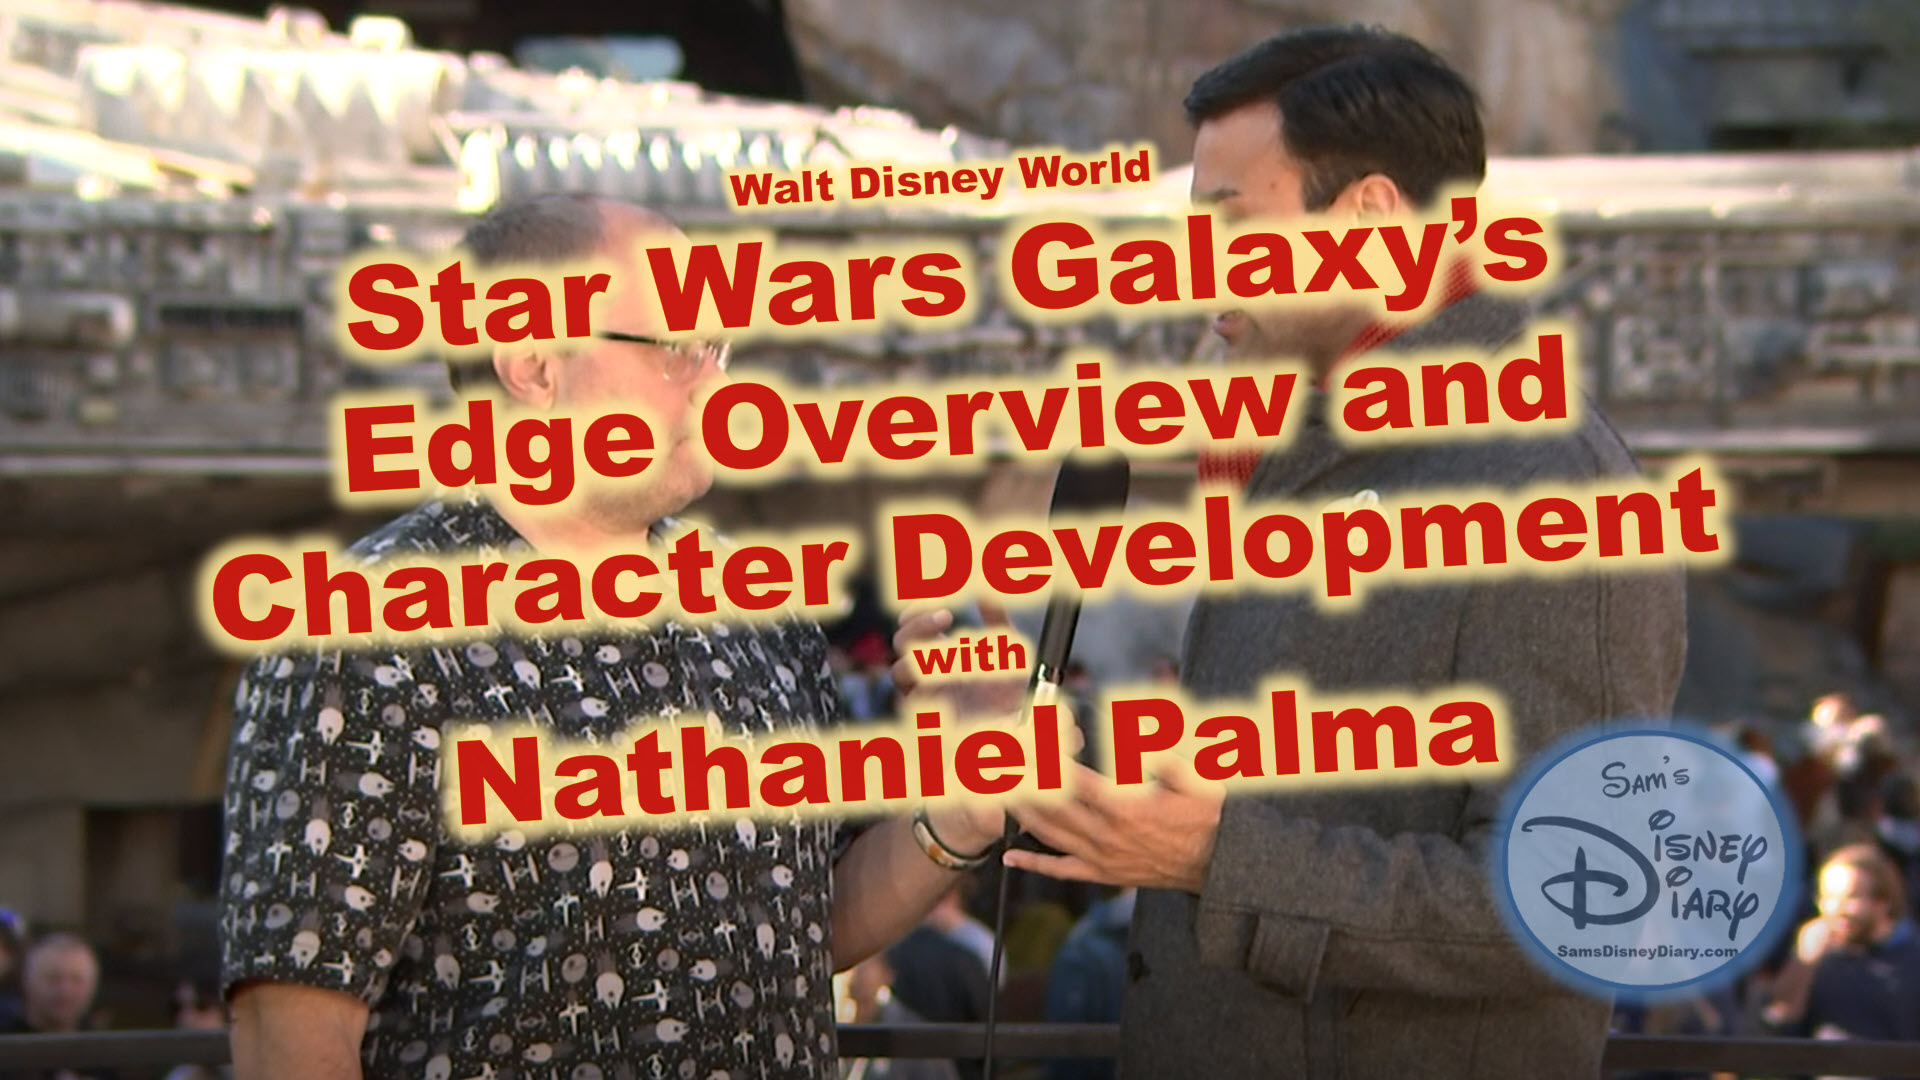 Star Wars Galaxy's Edge Overview and Castmember prep with Nathaniel Palma